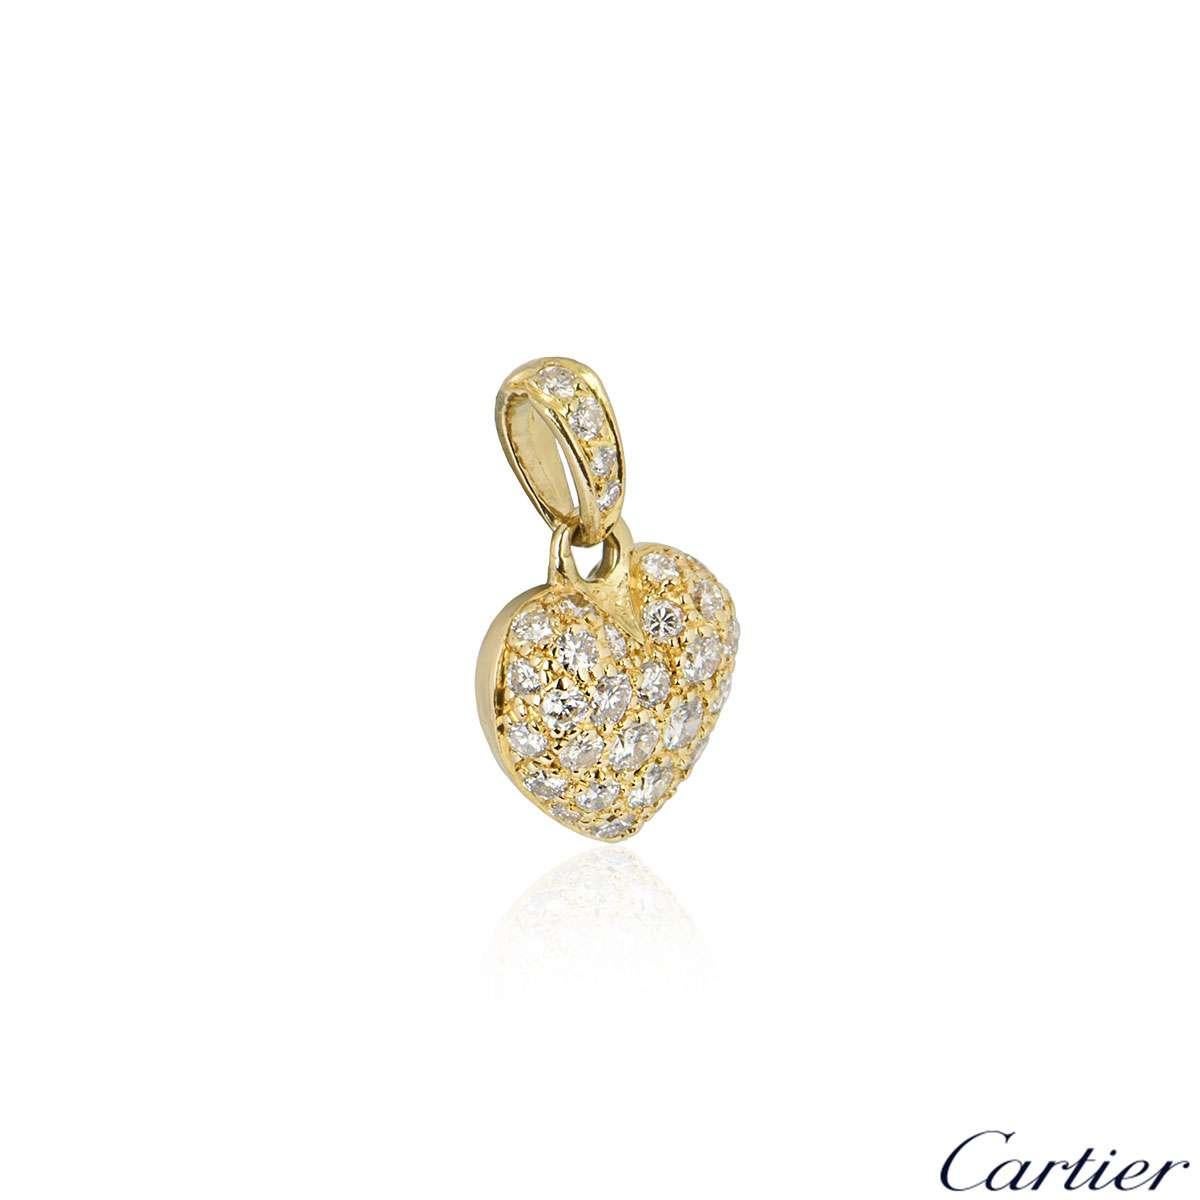 An 18k yellow gold diamond set heart charm by Cartier. The charm is pave set with round brilliant cut diamonds graduating in size. The charm has a gross weight of 1.6 grams.

The pendant comes complete with a presentation box and our own certificate